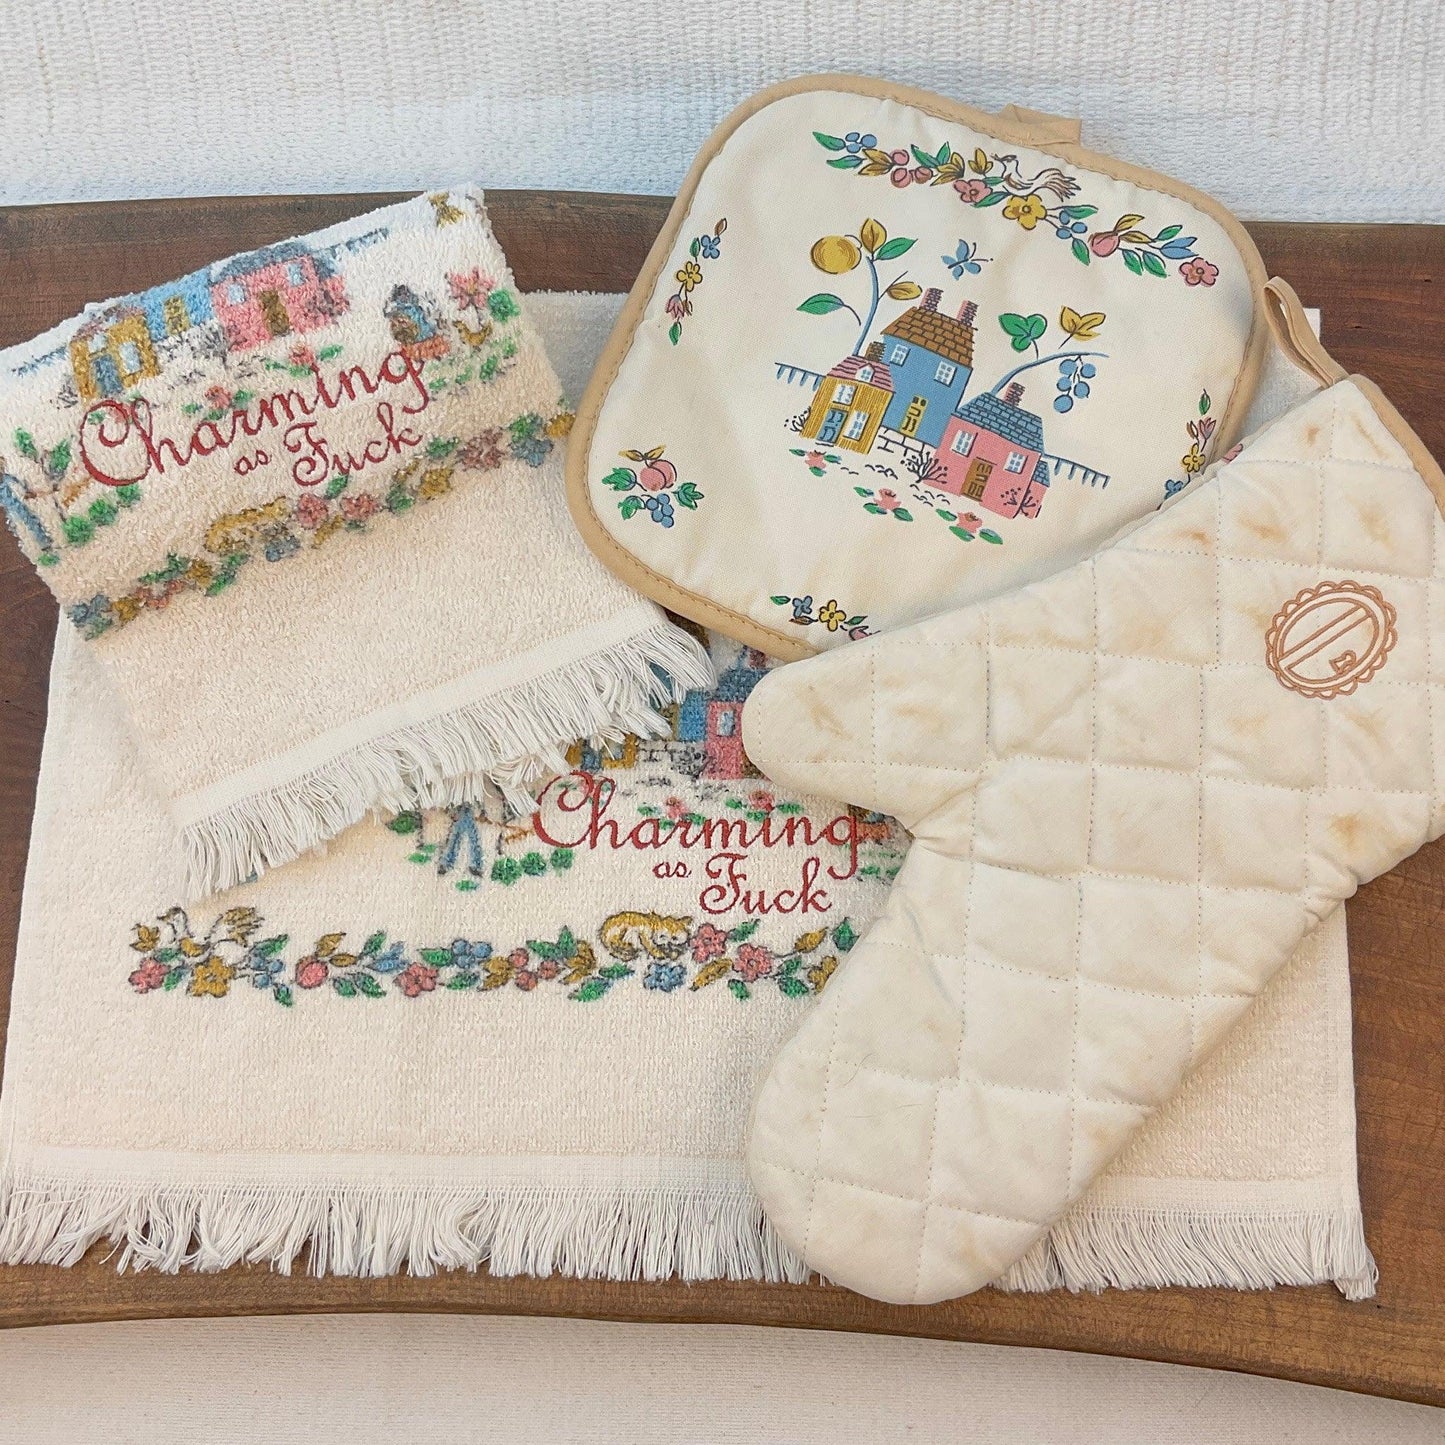 Charming Kitchen Towel & Oven Mitt Set - Offensively Domestic